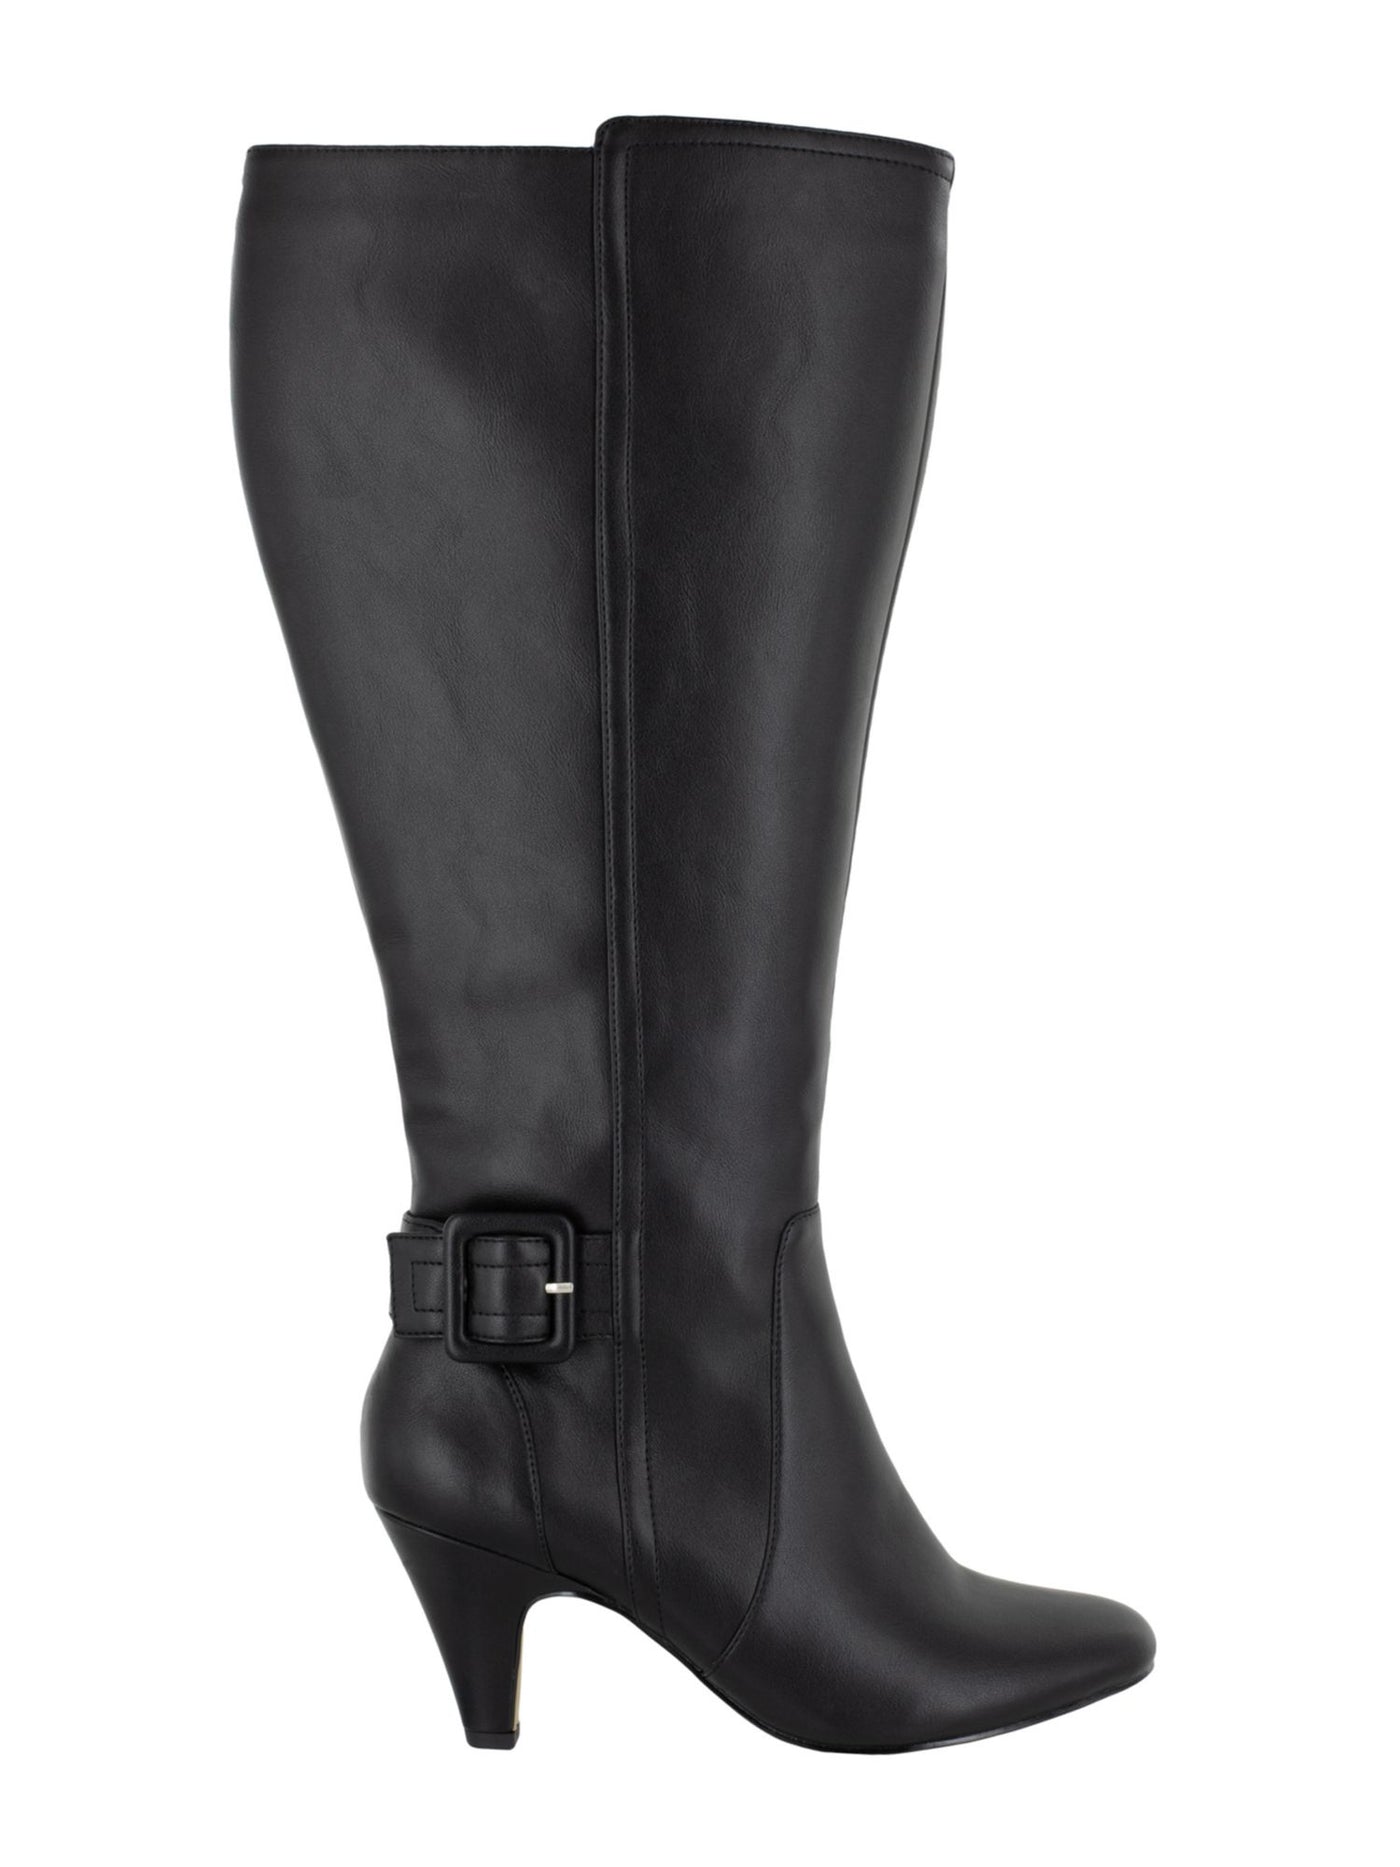 BELLA-VITA Womens Black Covered Buckle Accent Padded Wide Calf Troy Ii Almond Toe Sculpted Heel Zip-Up Heeled Boots 8.5 WW